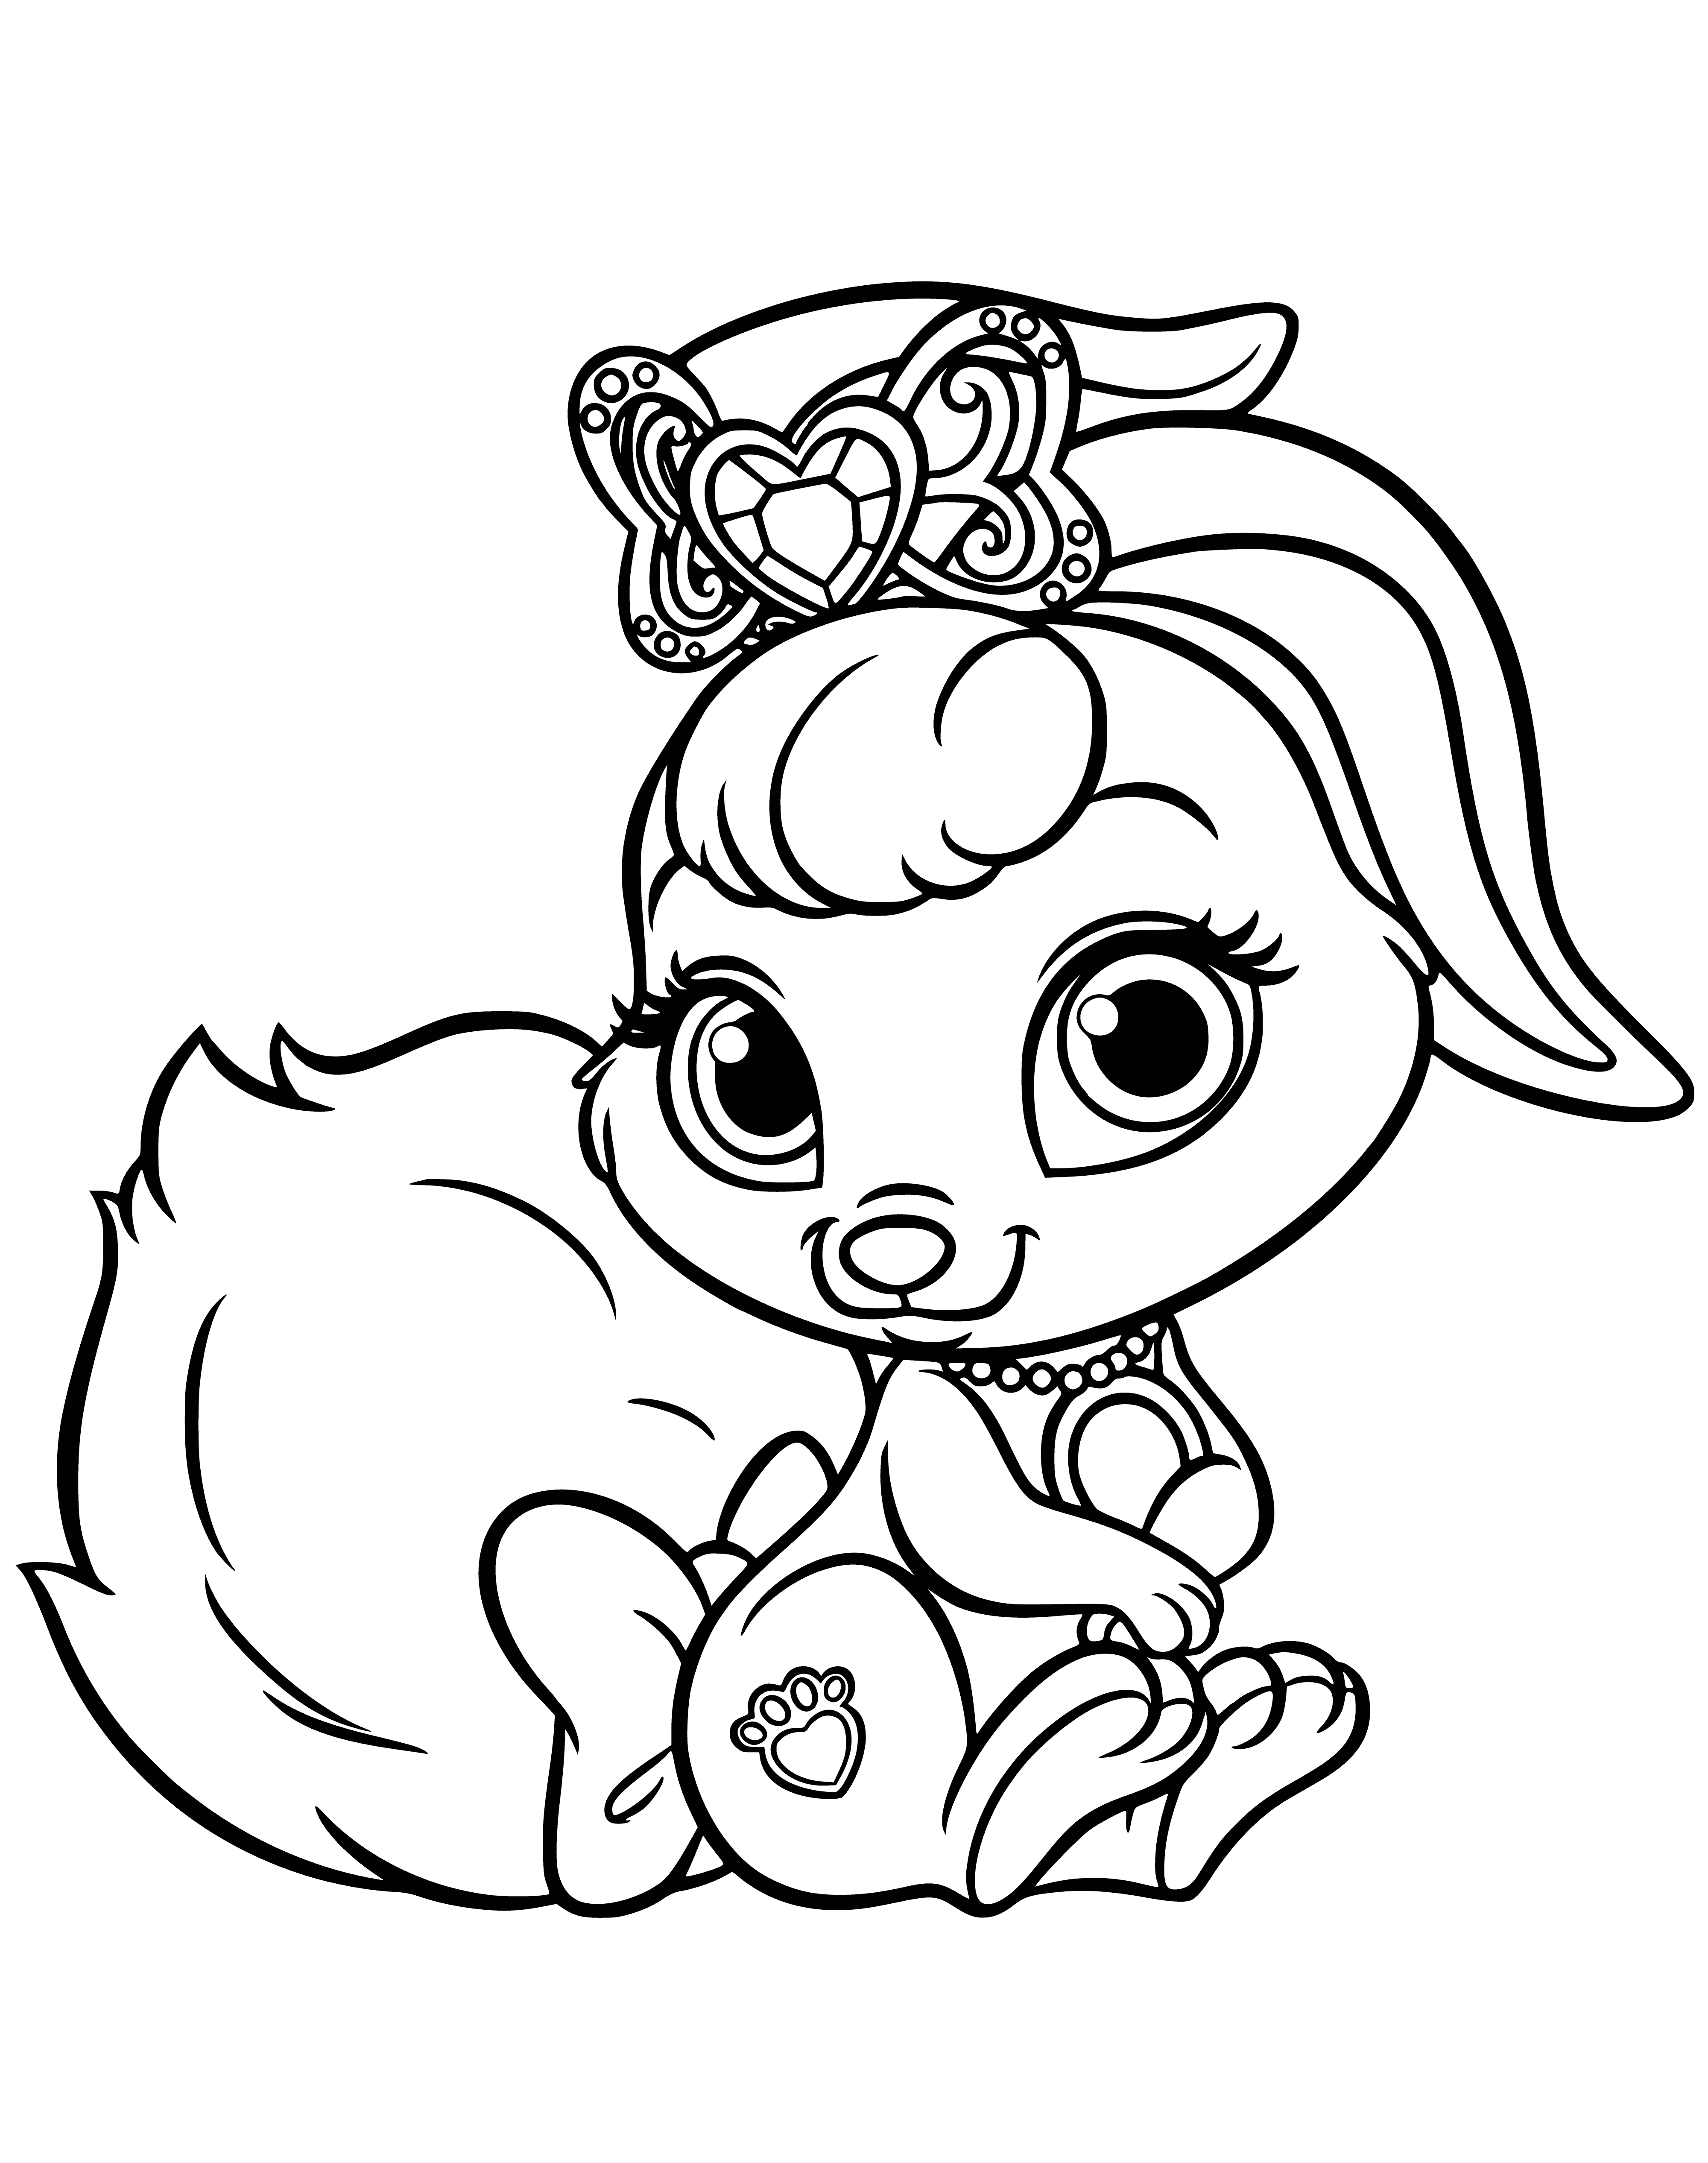 Hare Berry. Snow White's Pet coloring page